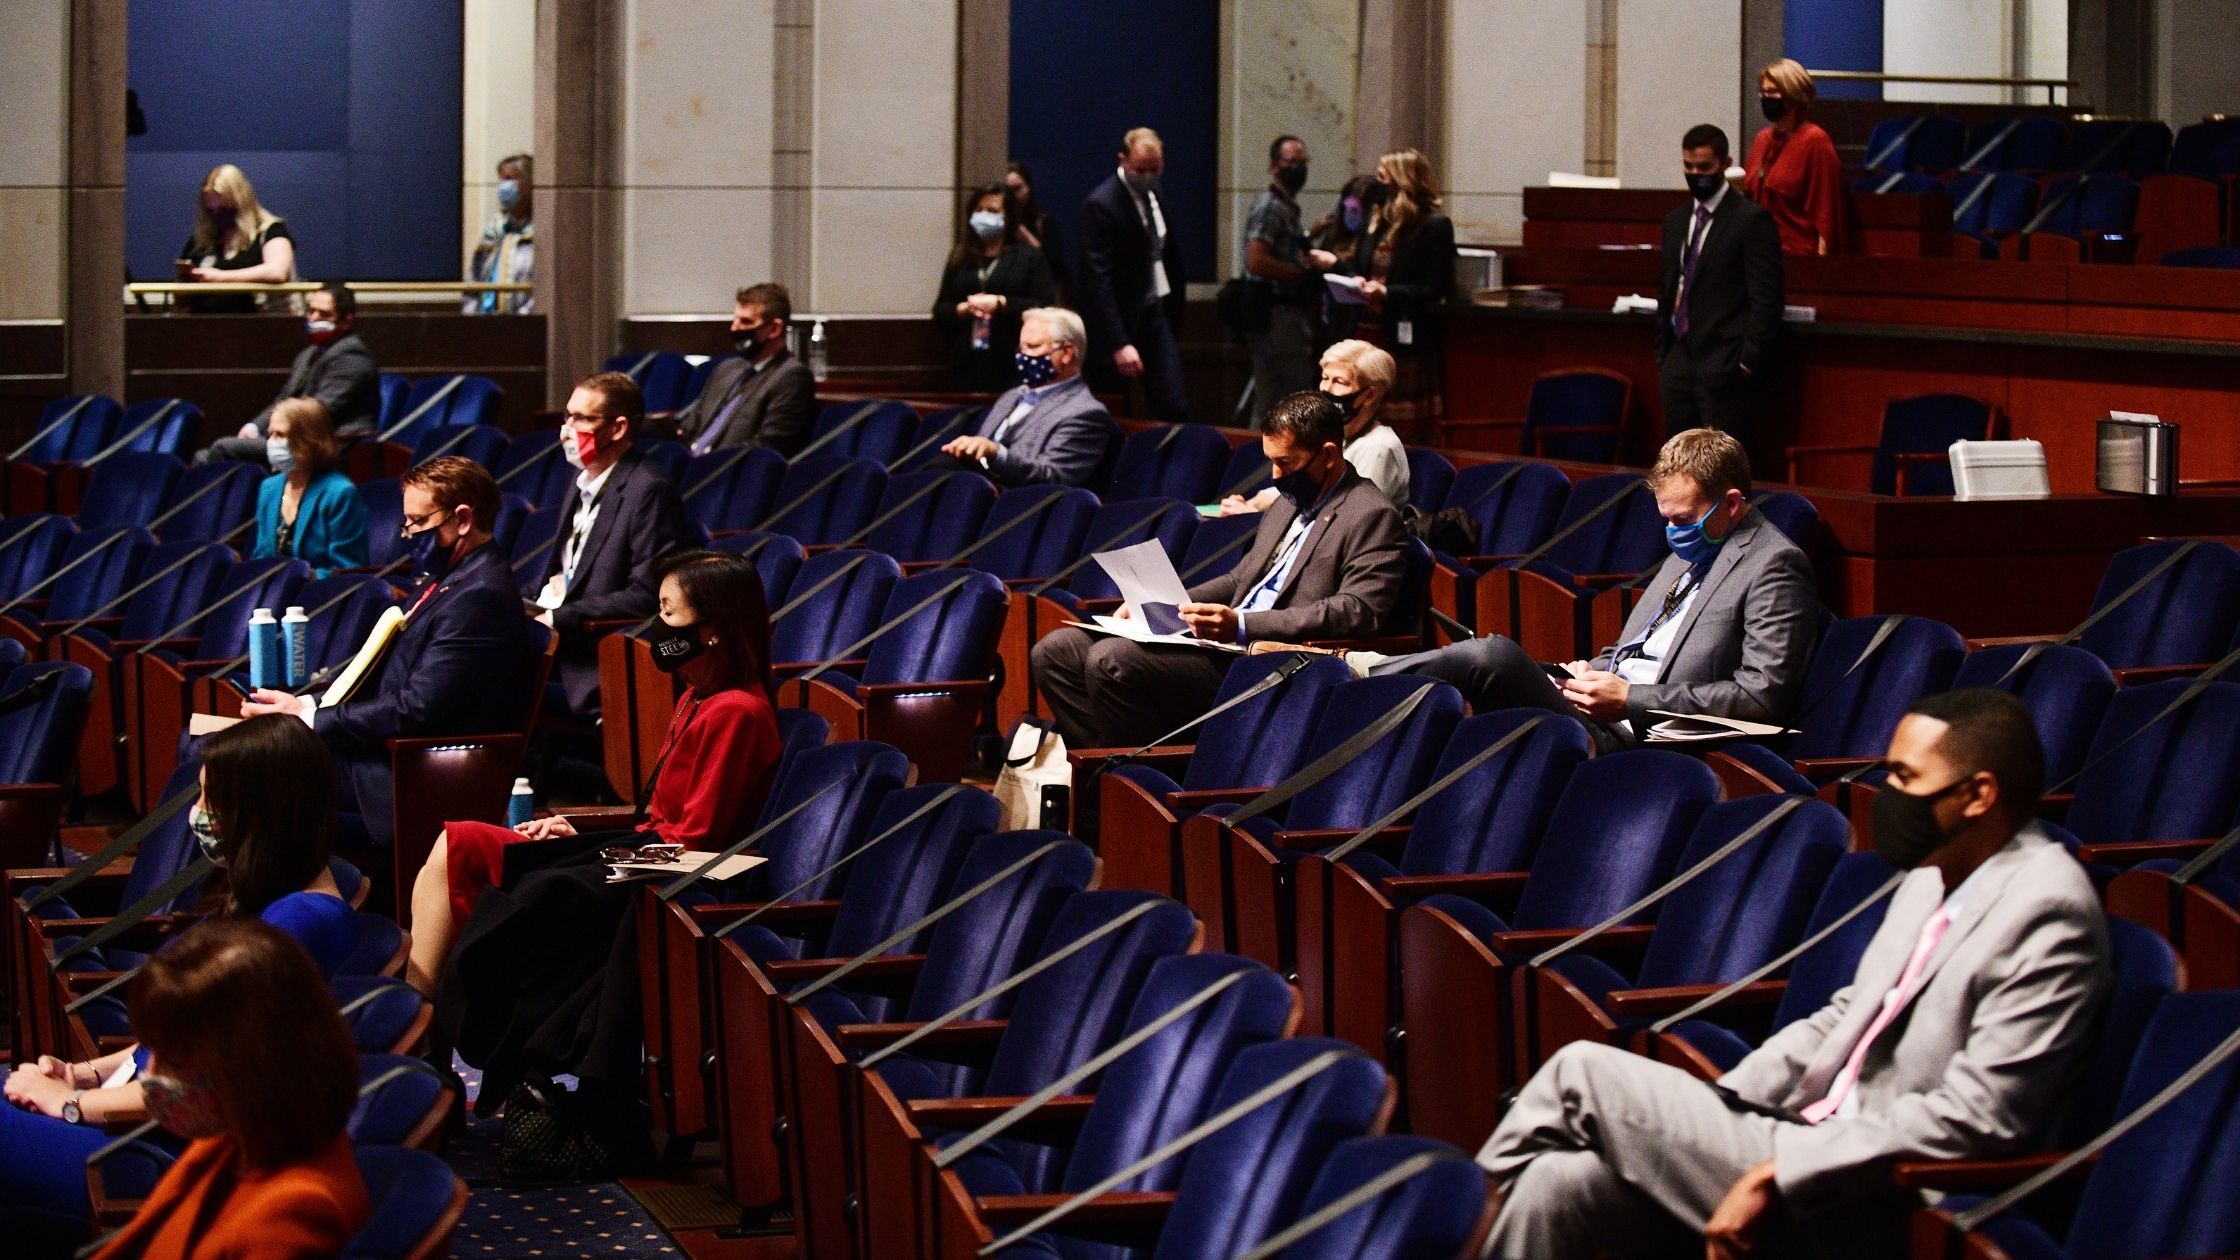 Newly elected members of the U.S. Congress participate in an orientation on Capitol Hill on November 13, 2020 in Washington, D.C.